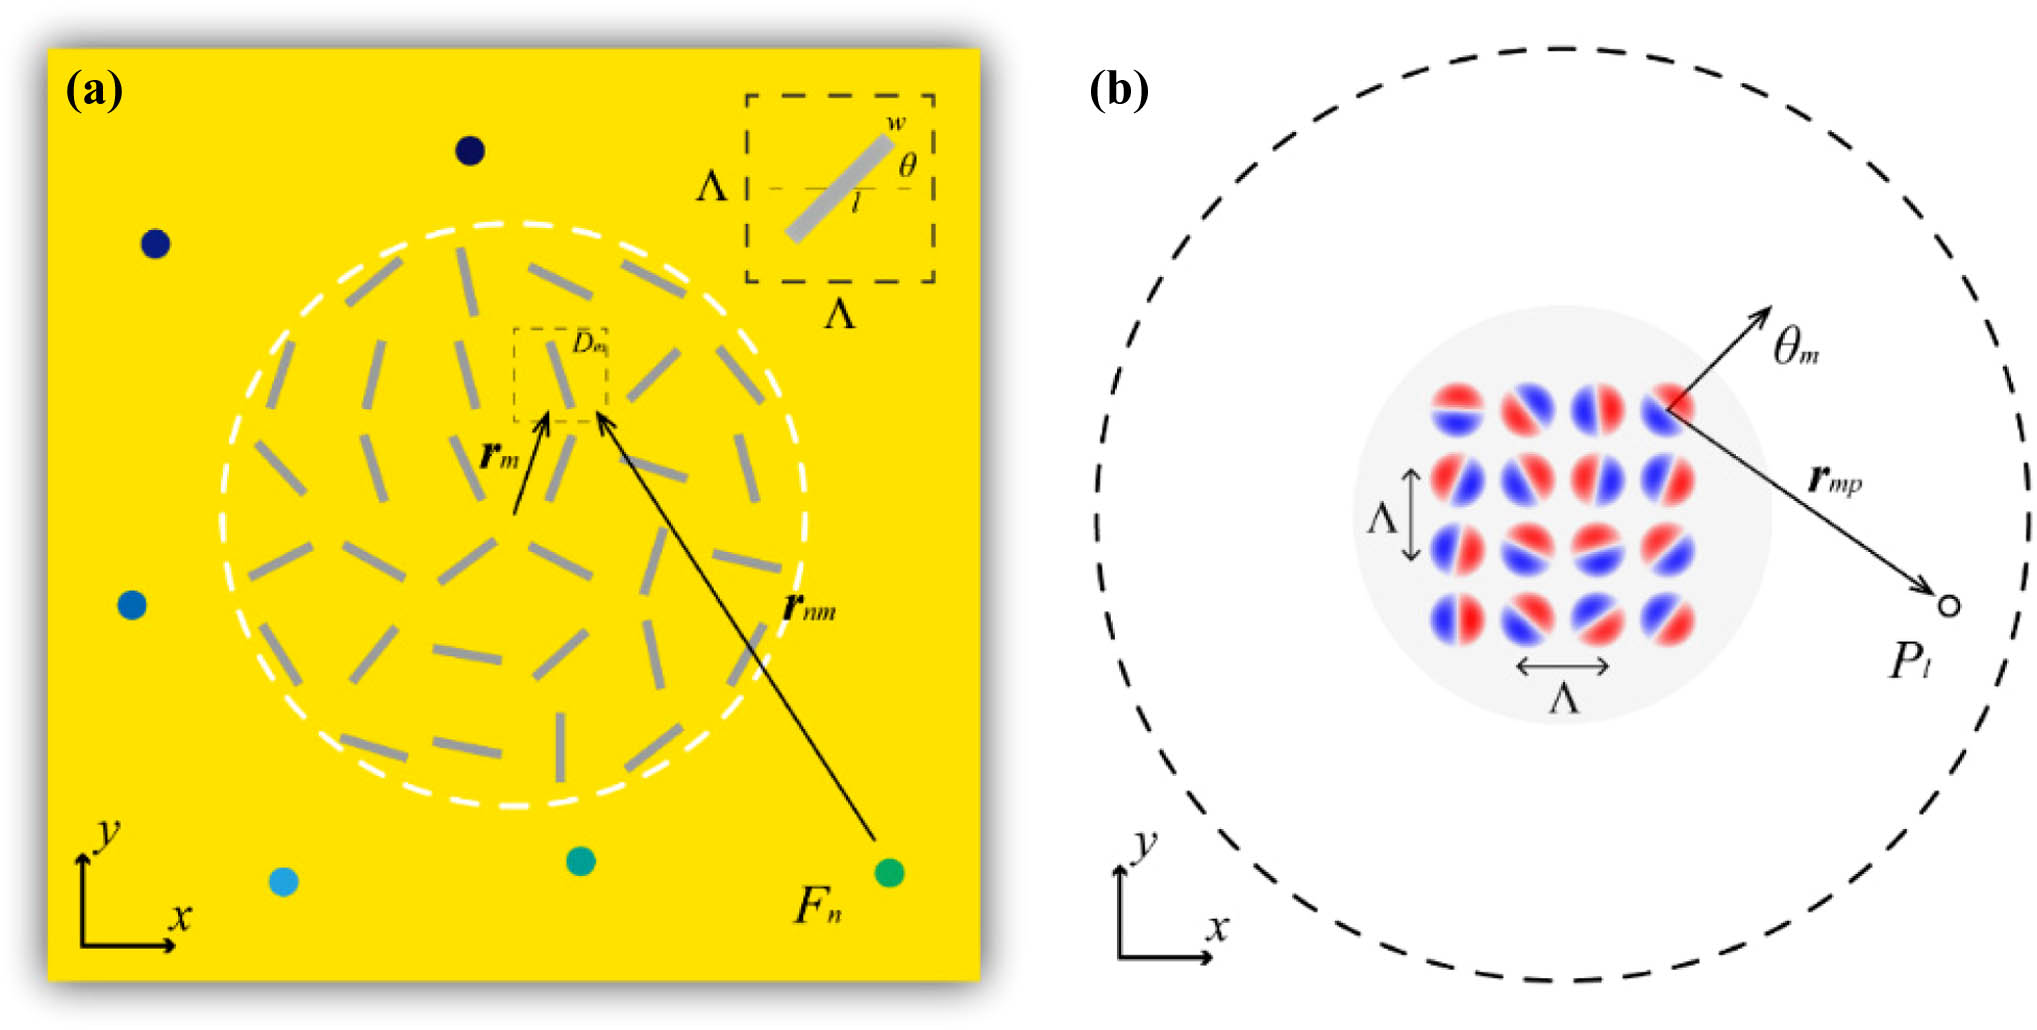 Schematic views of the holographic design scheme for (a) hologram generation and (b) SP field reconstruction. The parameters are: w, width of the resonator; l, length of the resonator; and θ, rotation angle of the slit resonator.